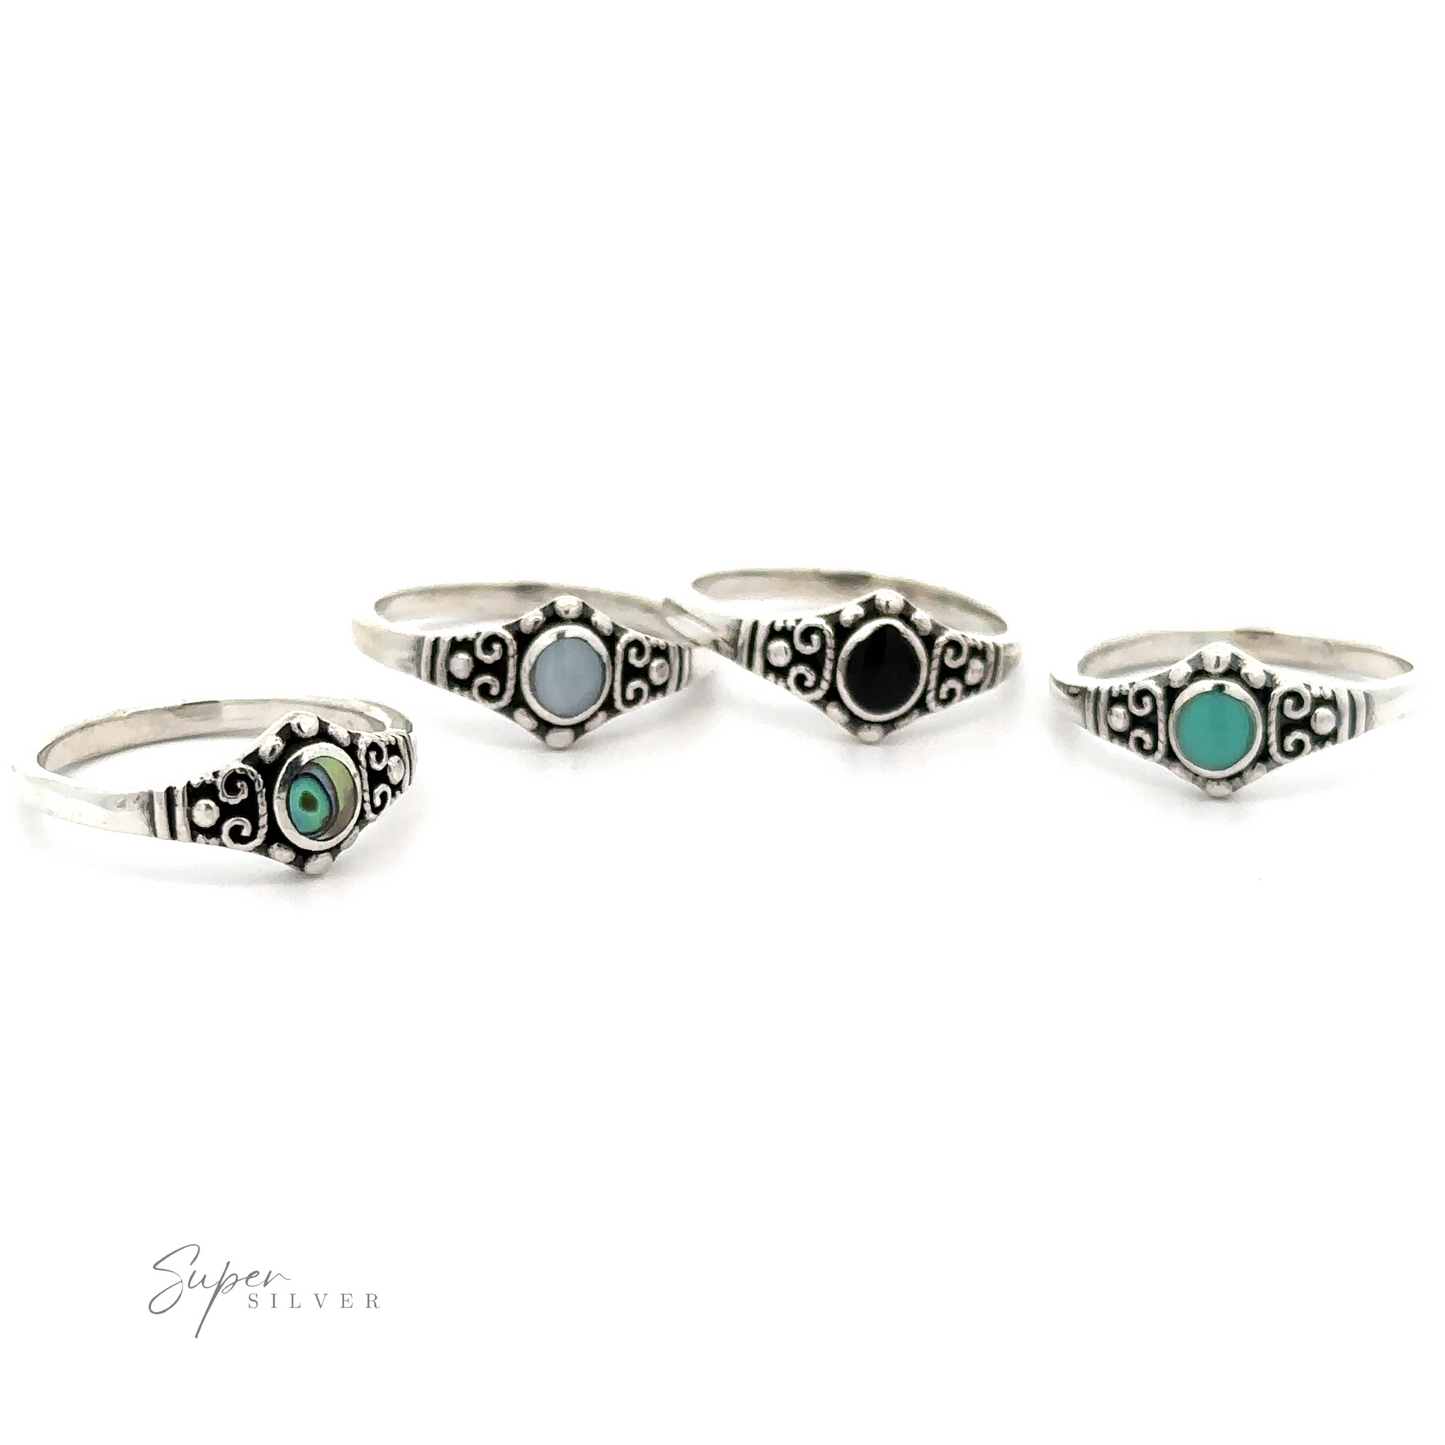 A set of four Dainty Inlaid Stone Rings With Silver Beads and Swirls featuring an antiqued finish.